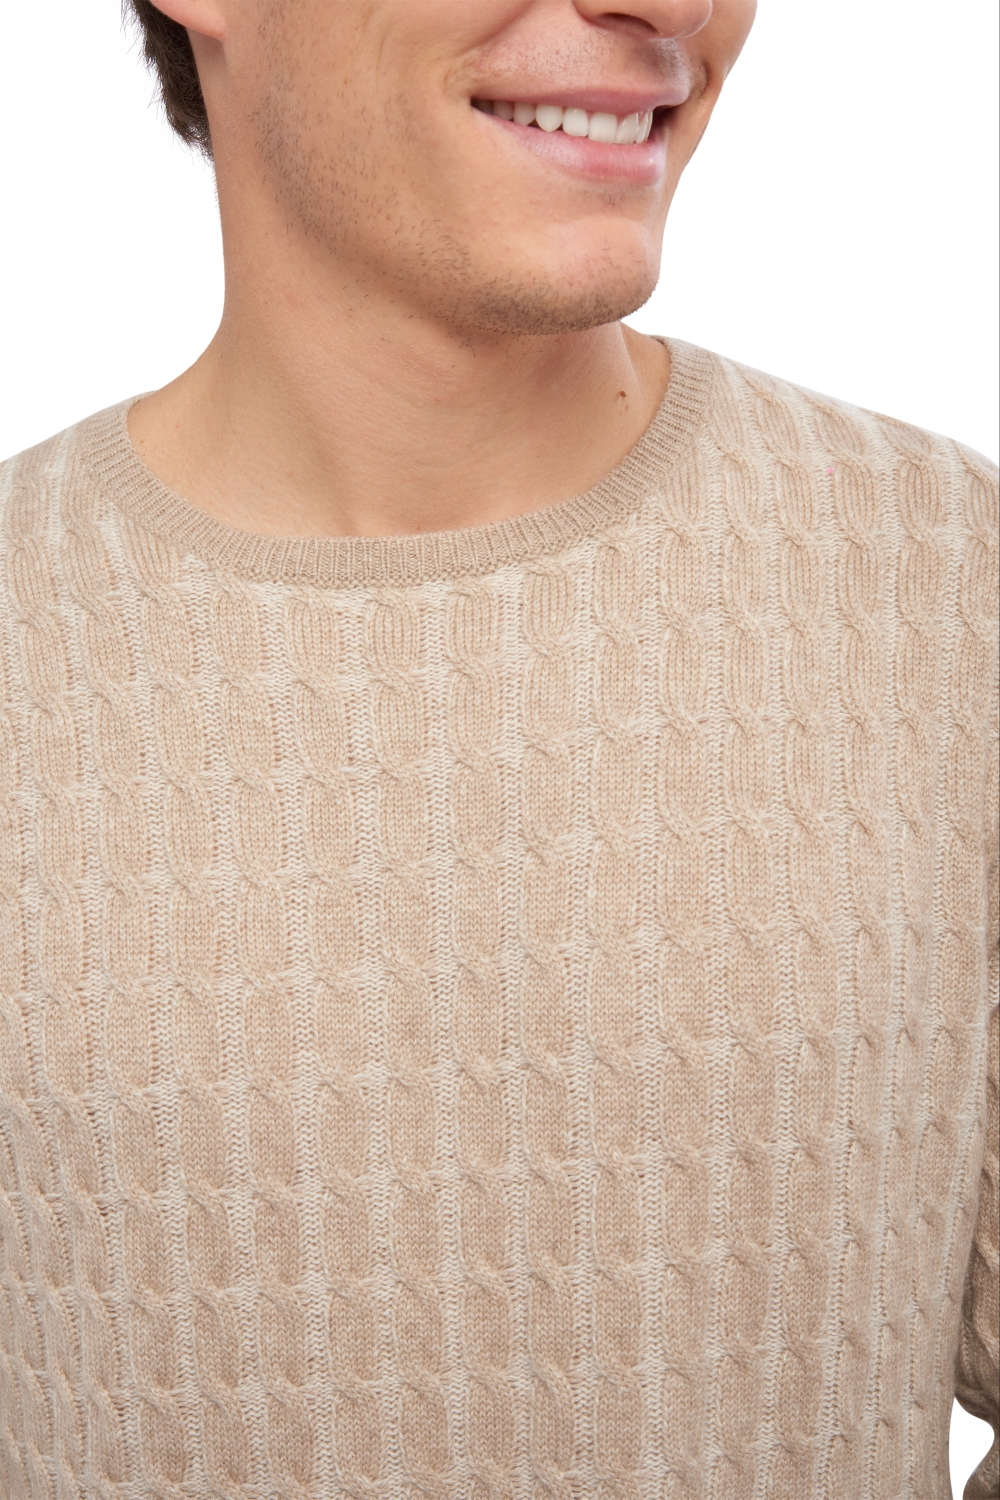 Cachemire pull homme col rond wes natural stone natural ecru xl